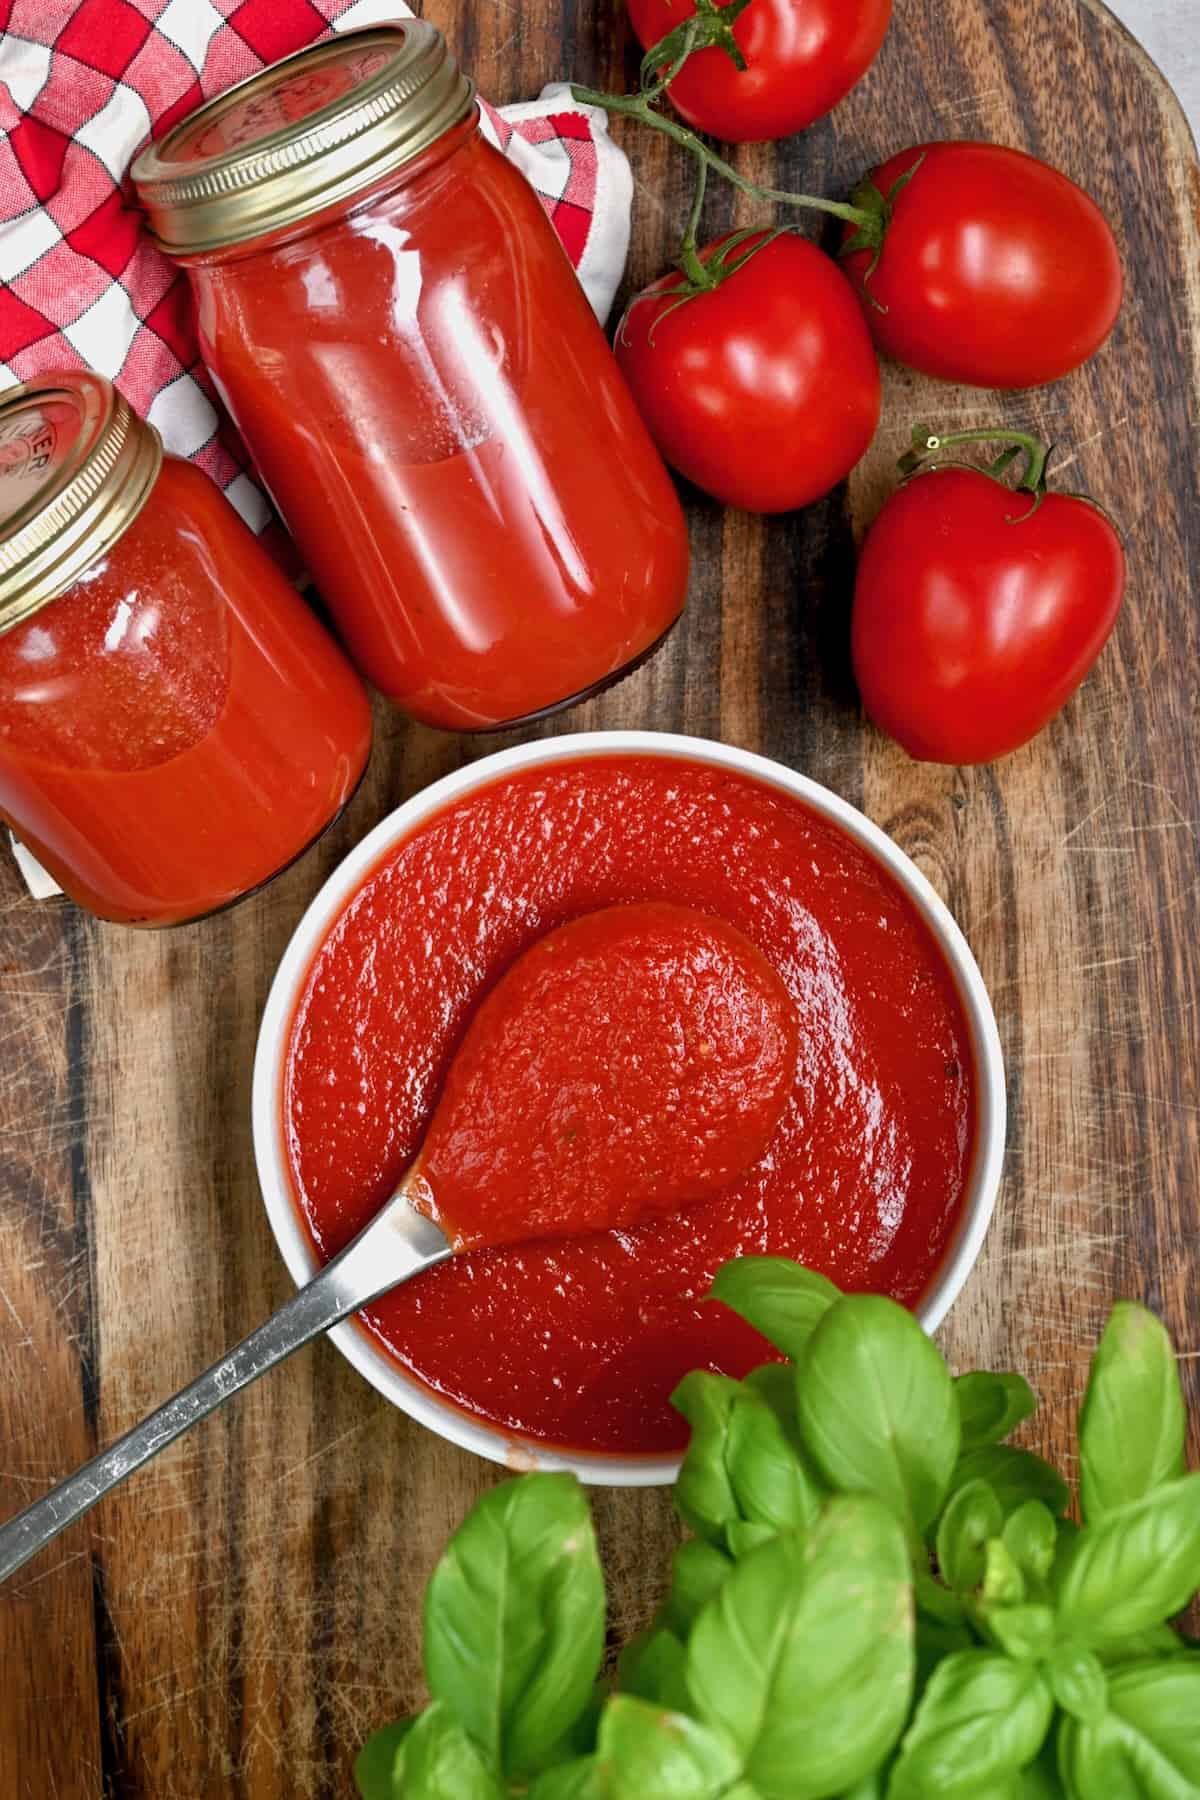 Homemade pizza sauce in a bowl and in jars next to tomatoes